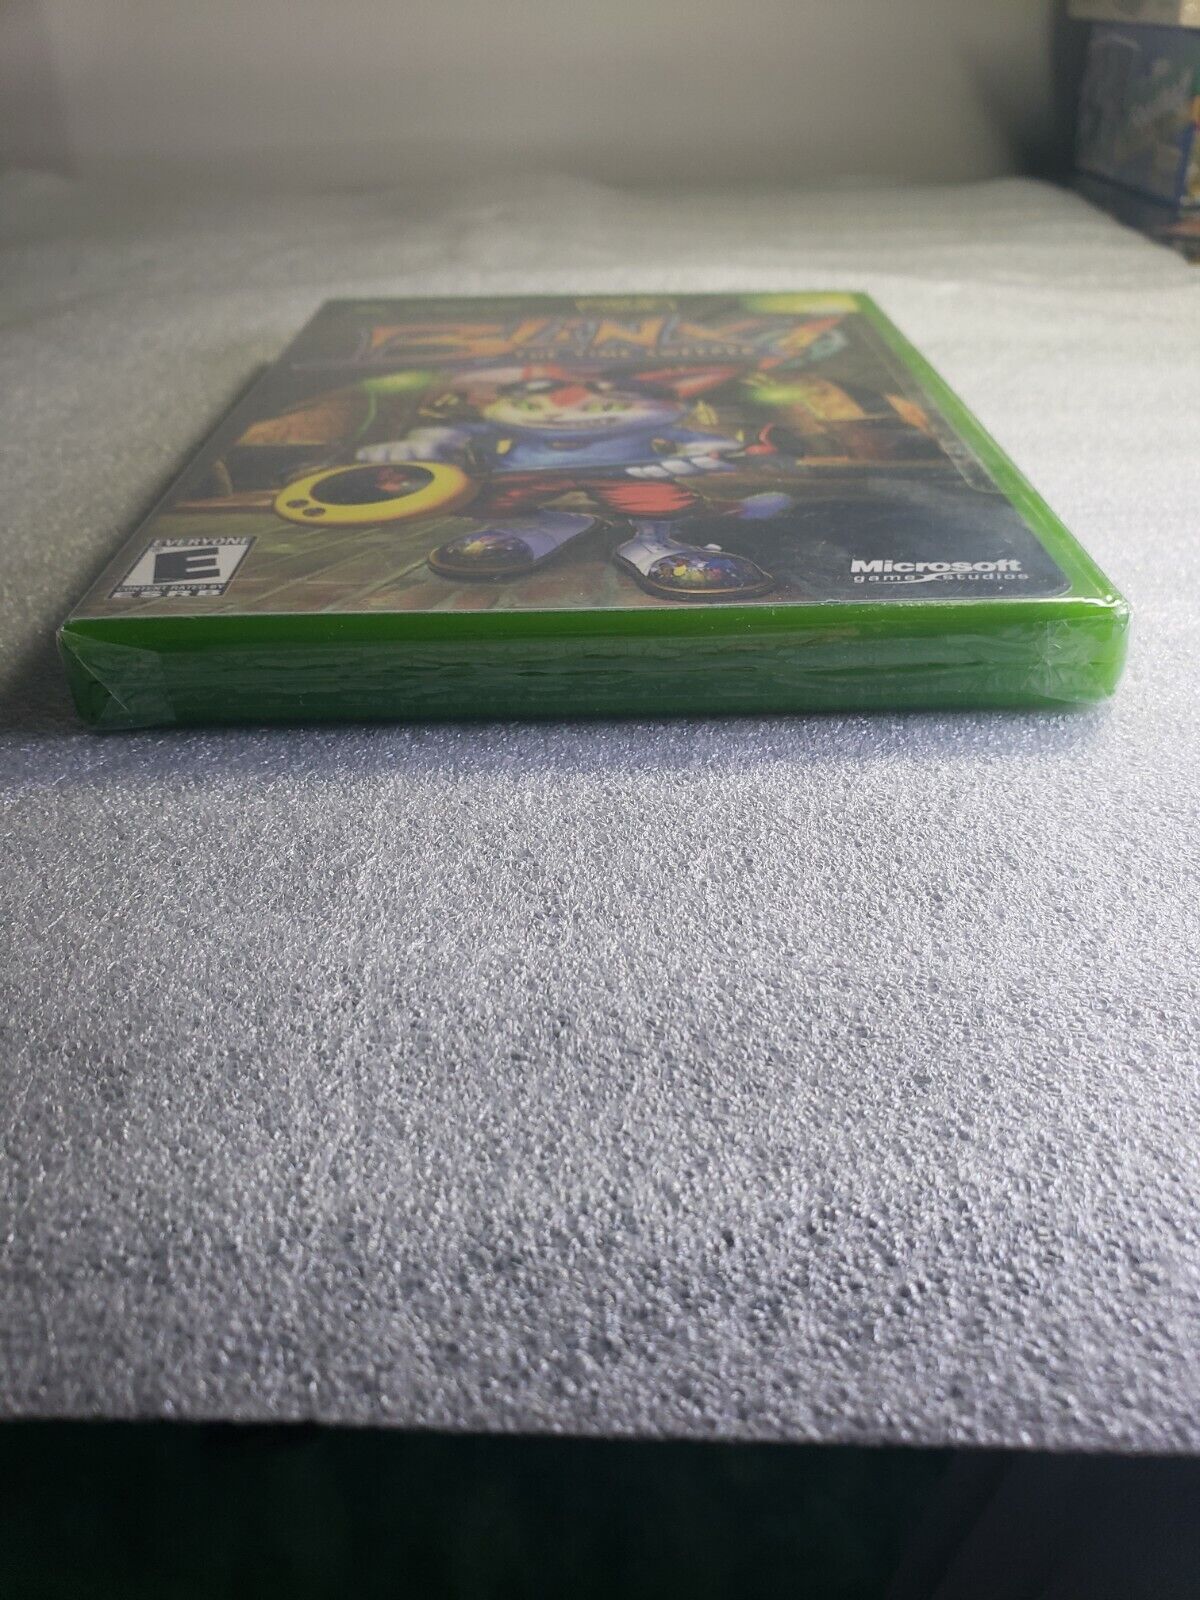 New Blinx The Time Sweeper for XBox FACTORY SEALED See all Photos Popularny, 2022